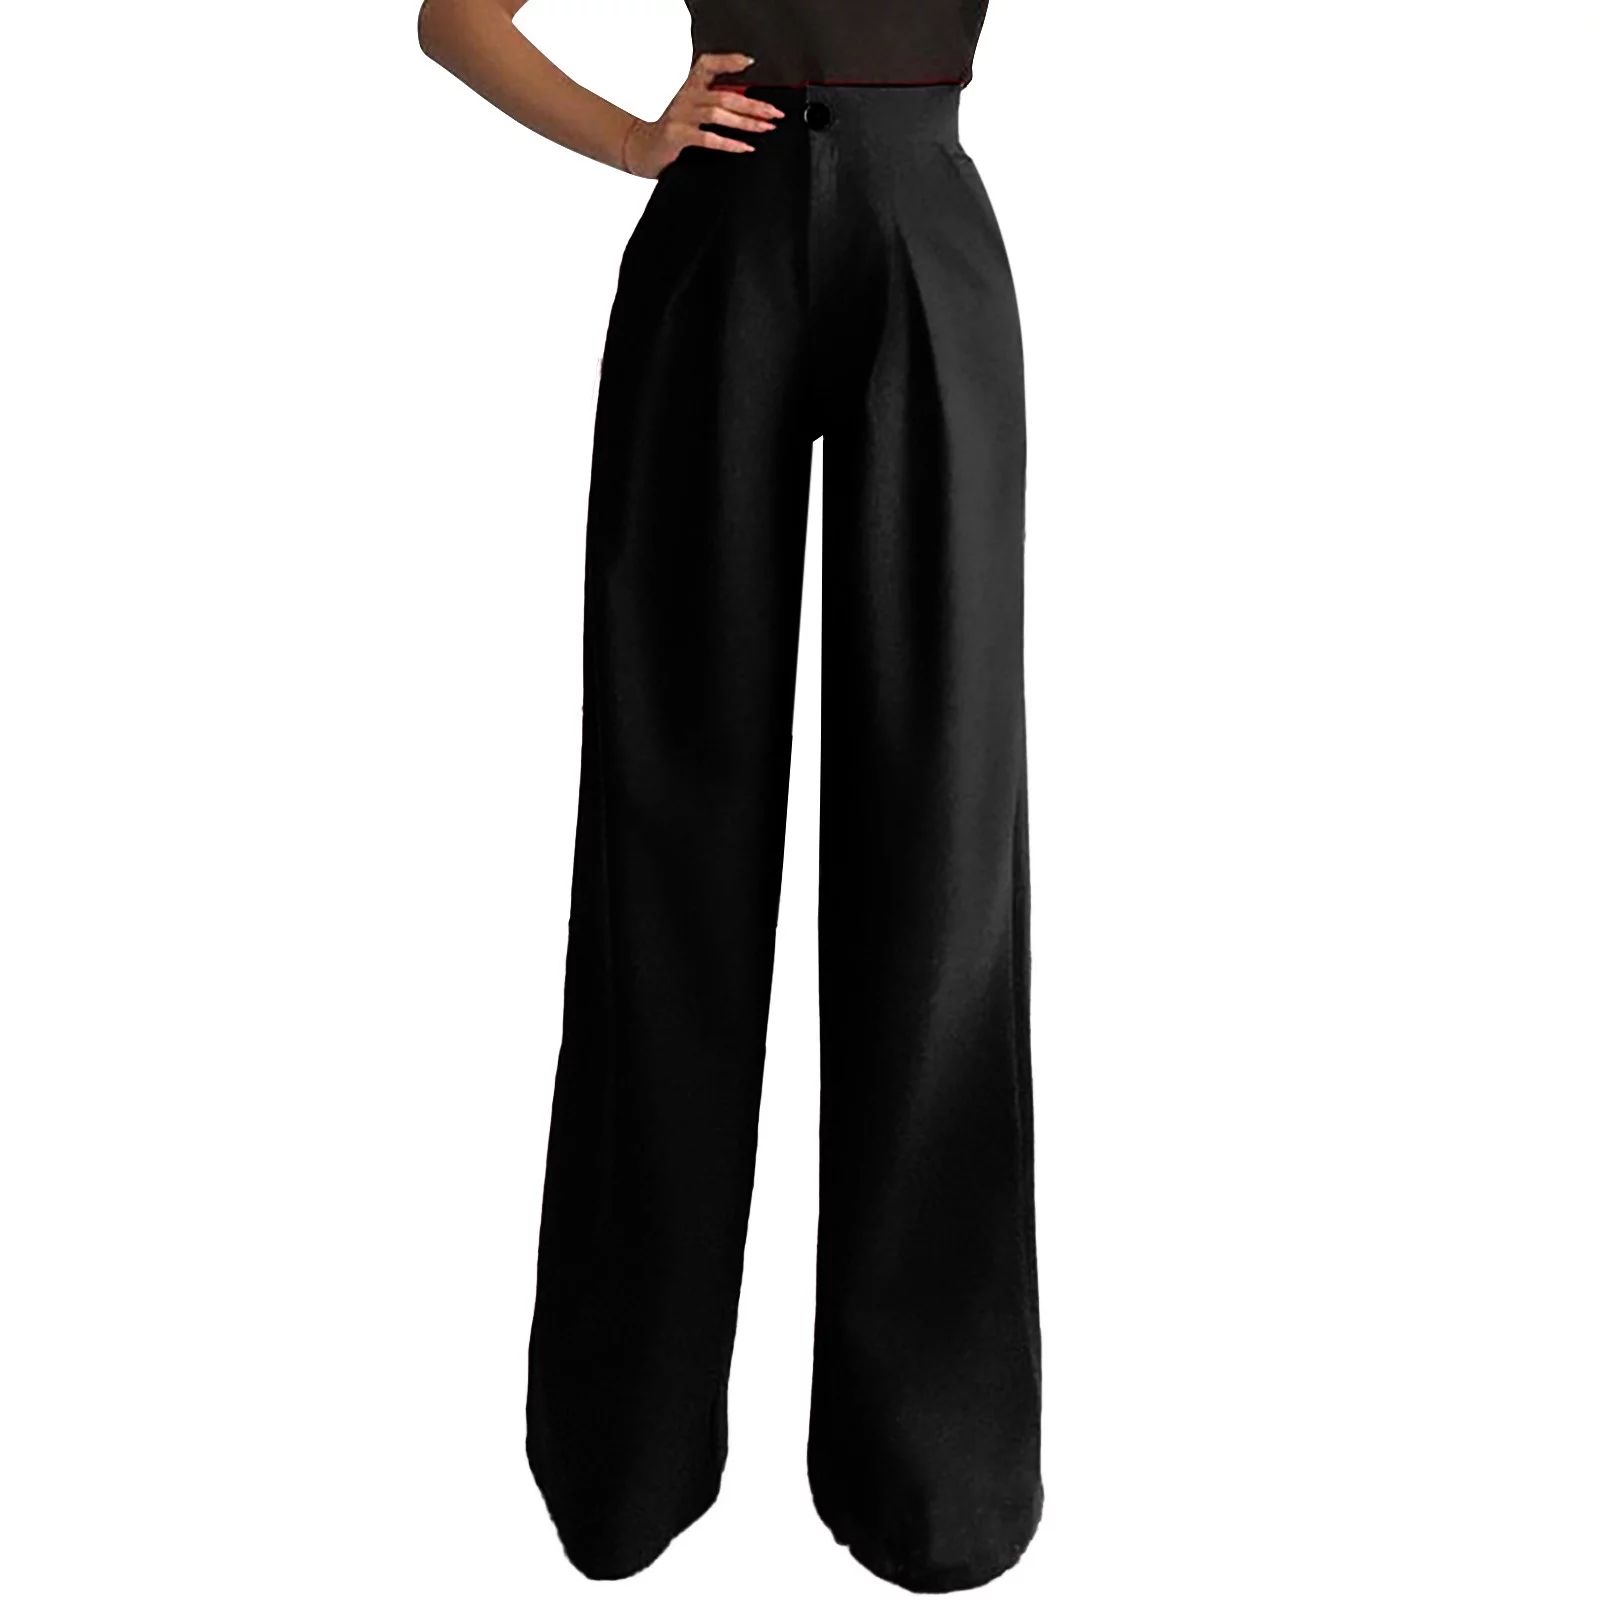 YUEHAO pants for women Womens Solid Casual High Waisted Wide Leg Palazzo Pants Trousers Women's C... | Walmart (US)